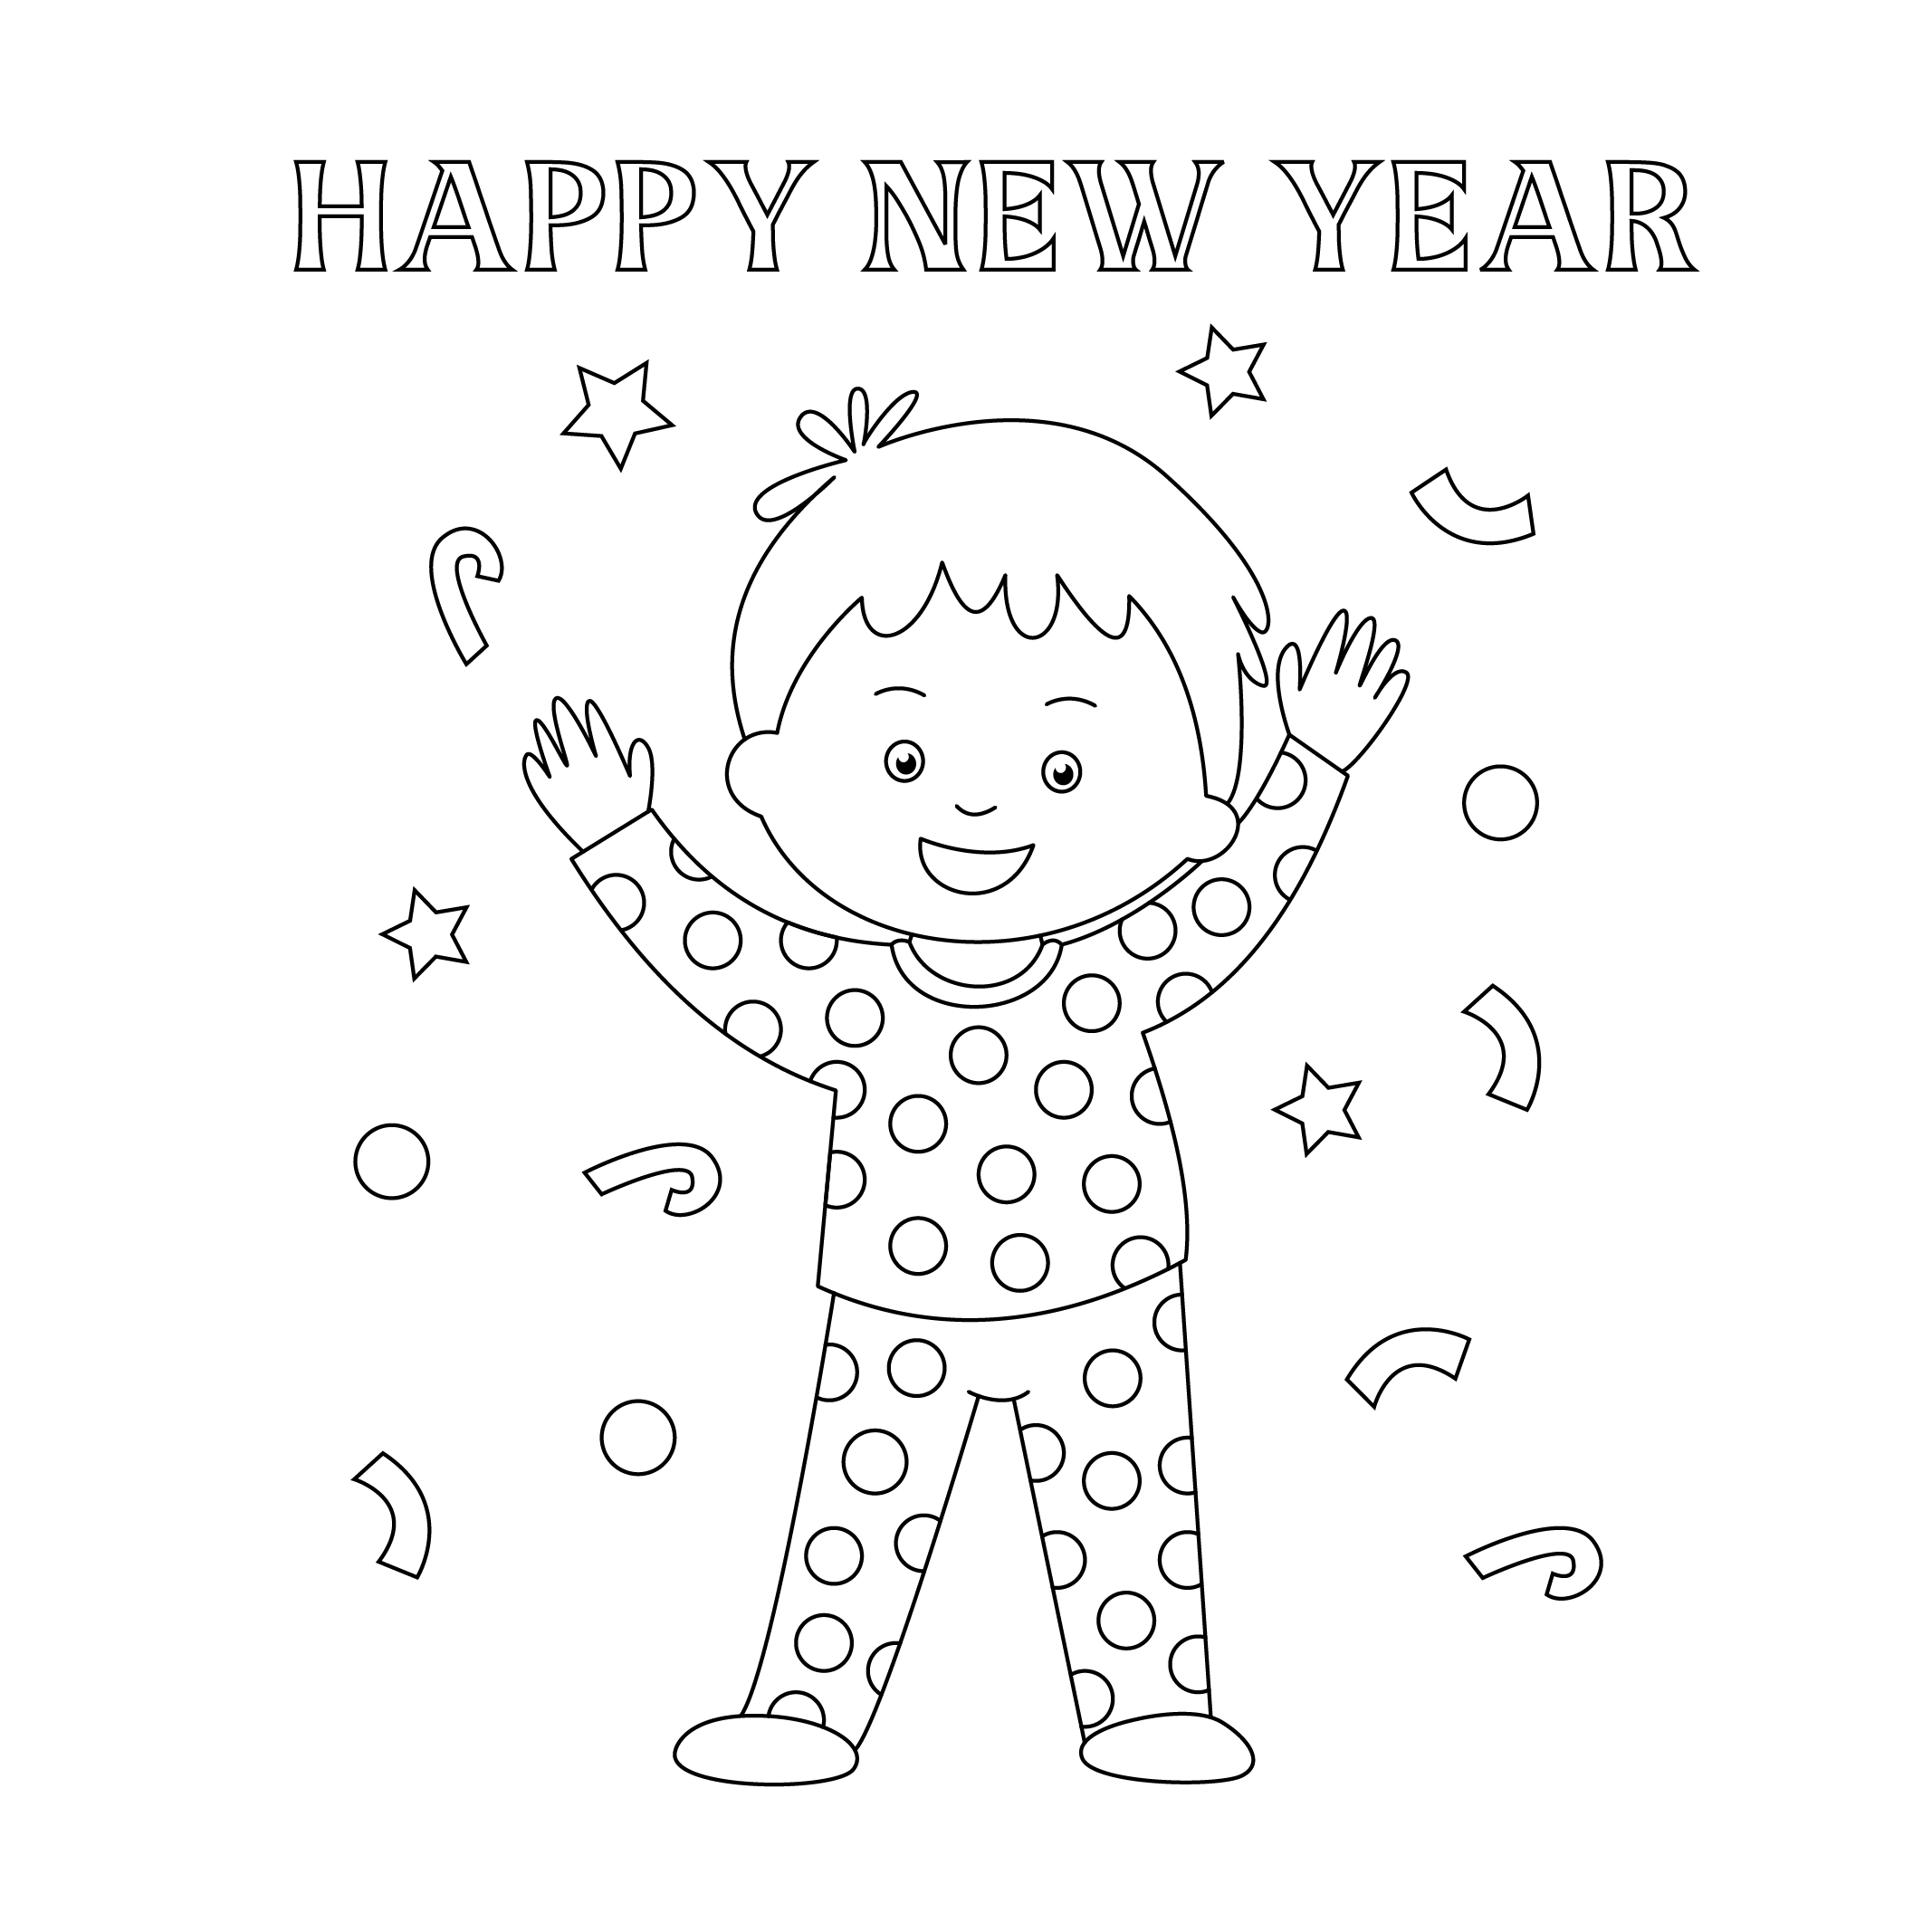 Discover more than 165 new year sketch design best - in.eteachers